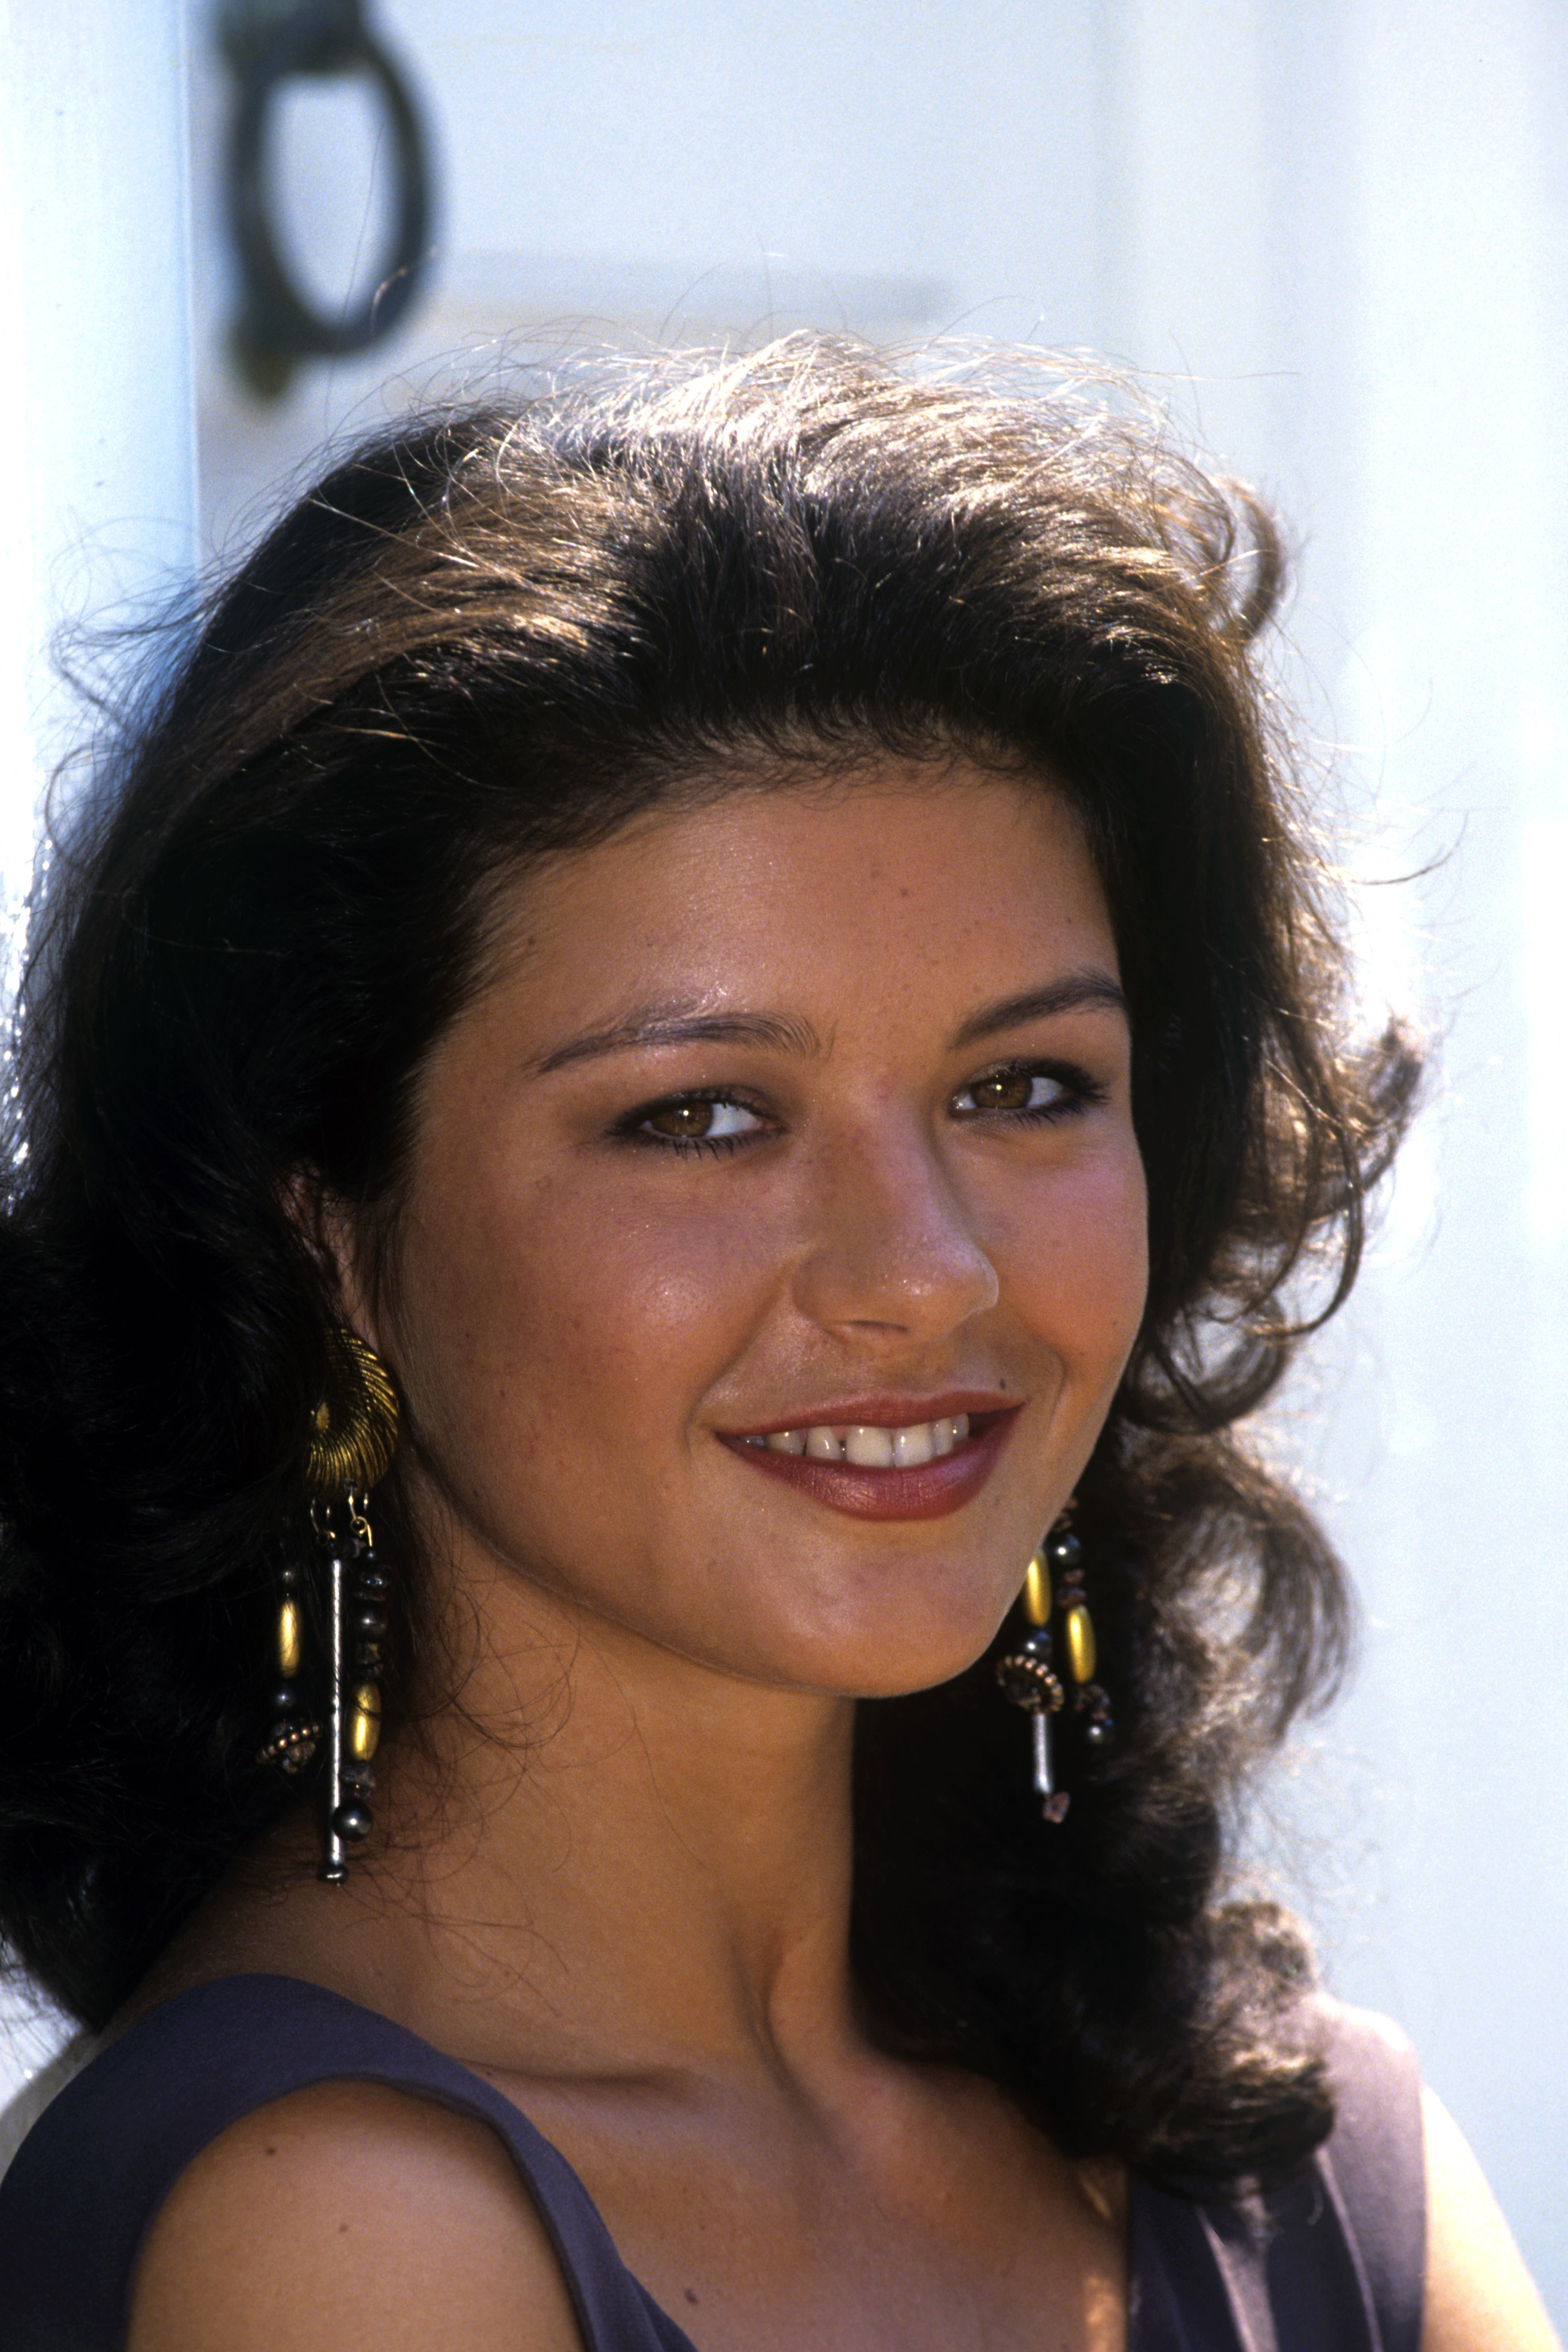 Catherine Zeta Jones in London, England on 29th July, 1991. | Source: Getty Images